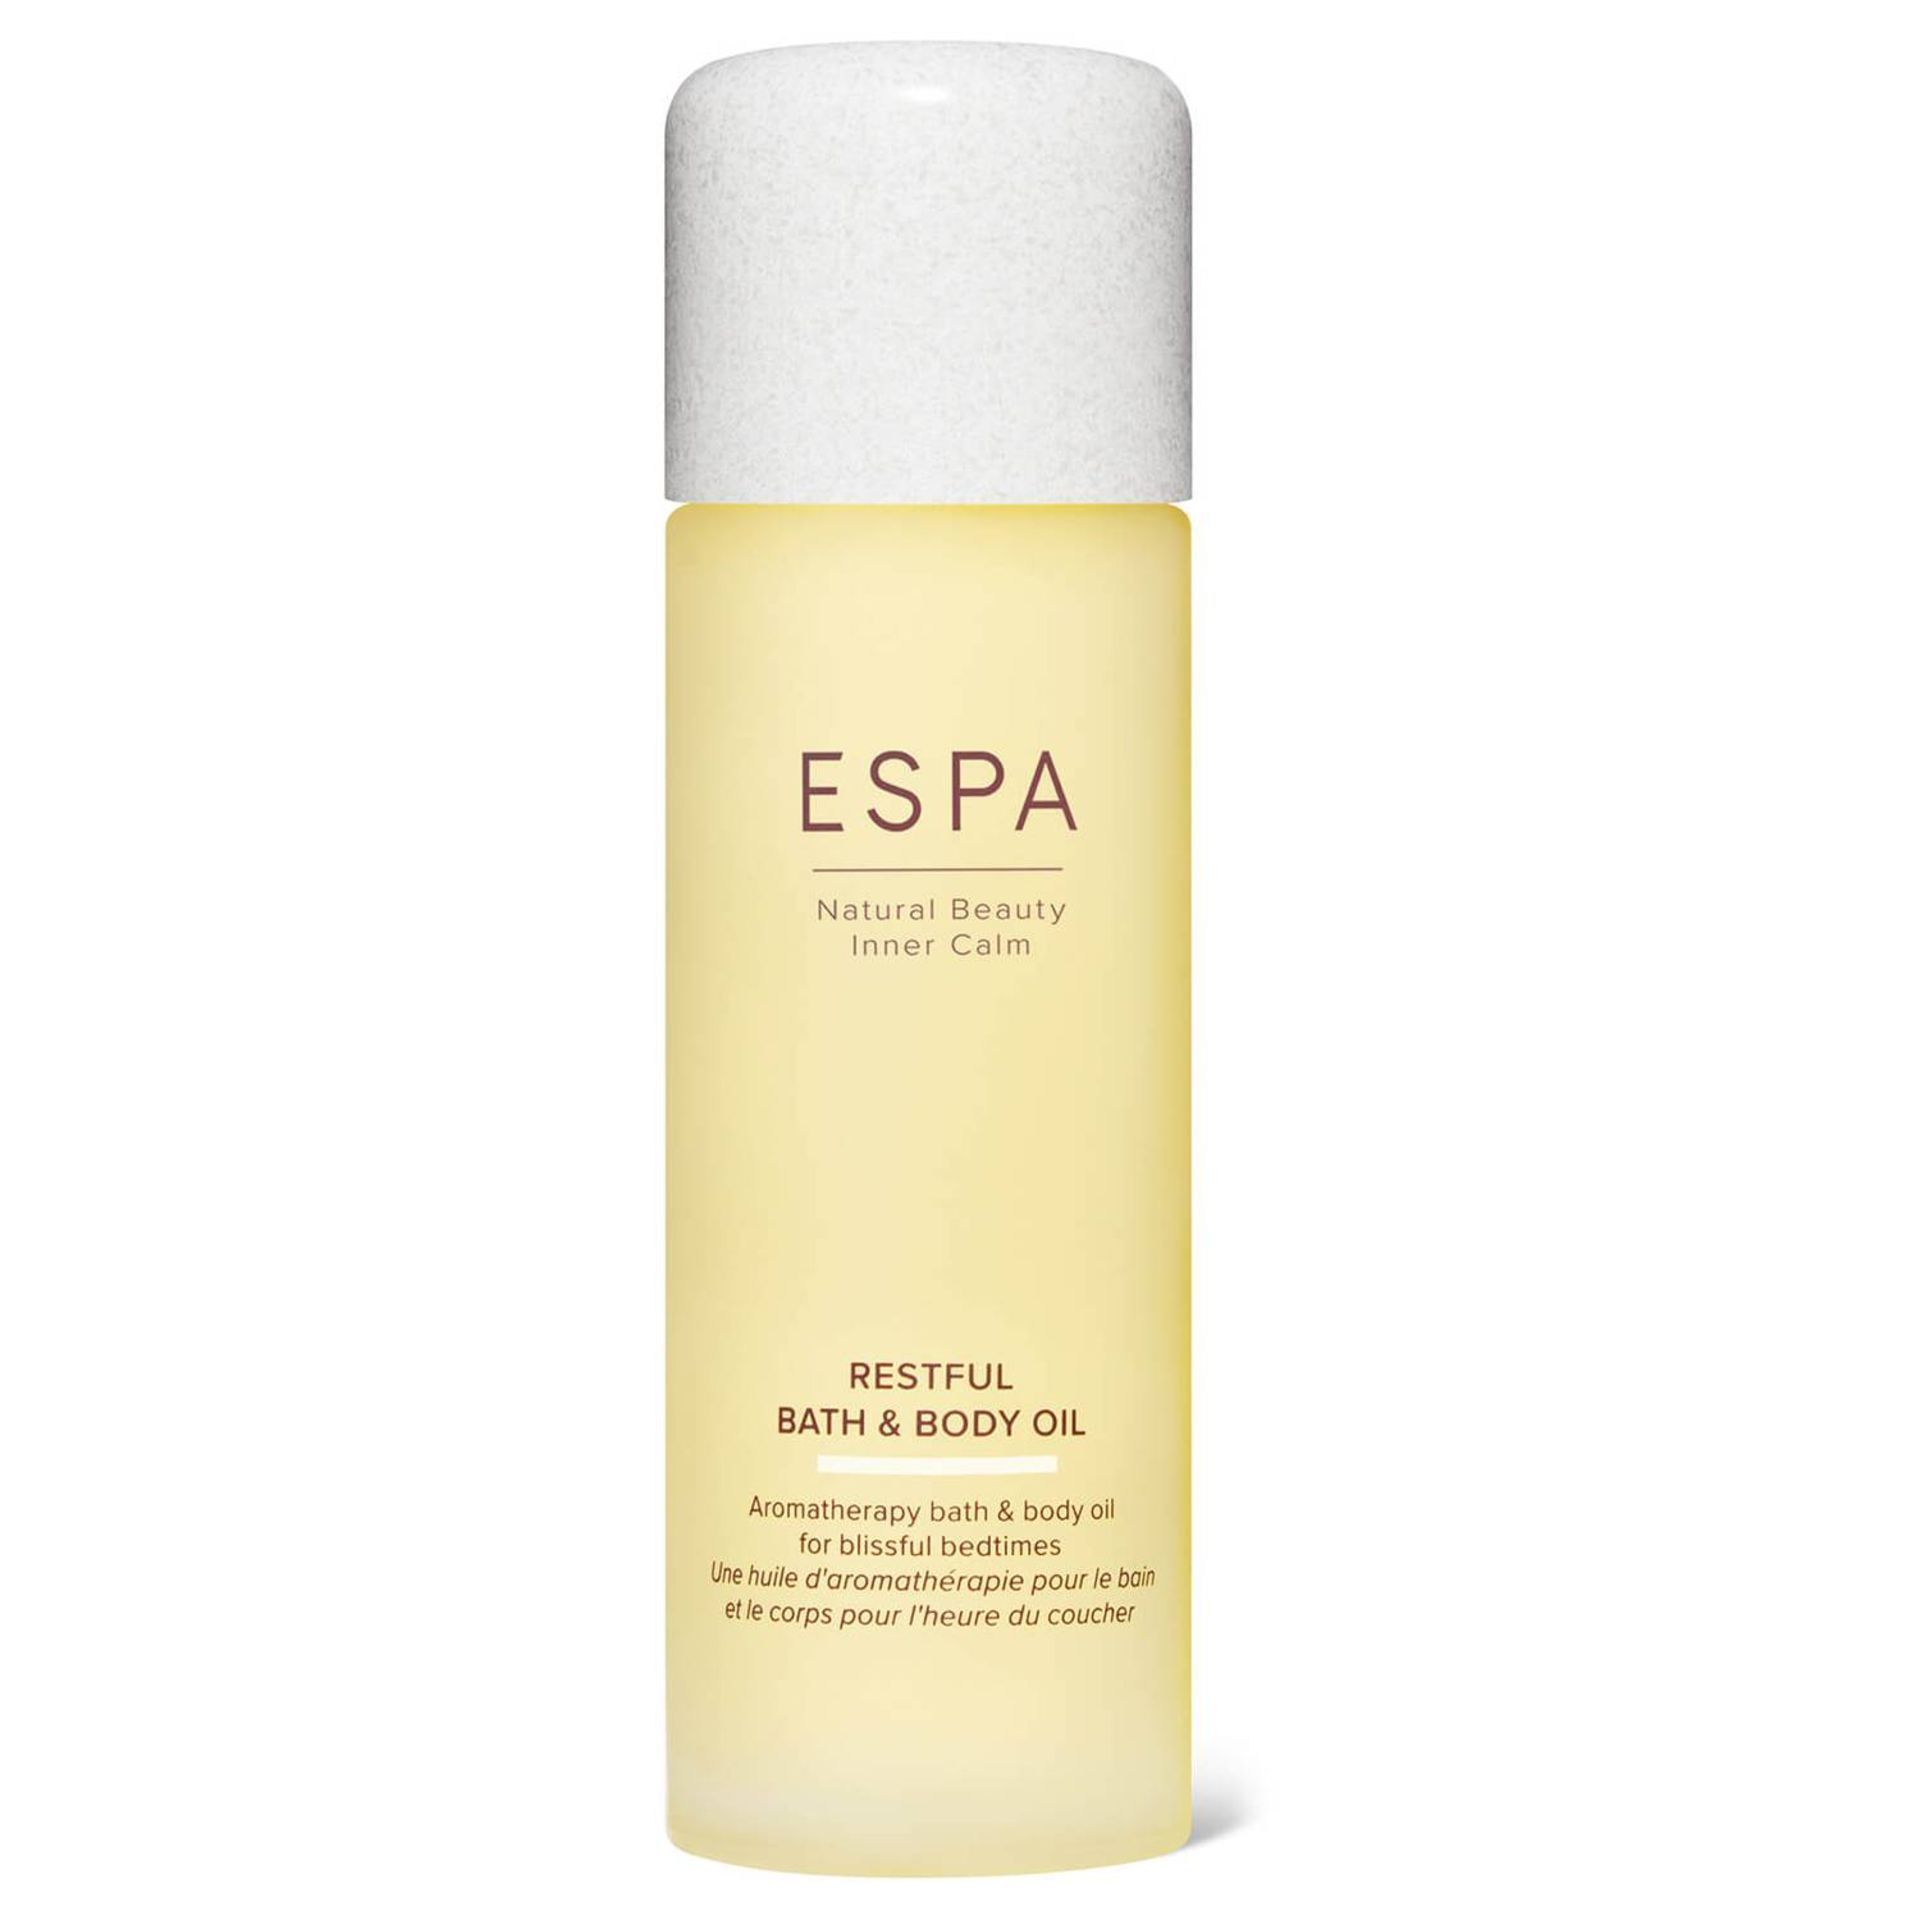 2x NEW & BOXED ESPA Restful Bath & Body Oil 500ml. RRP £180 Each. (R12-12). Our Signature Blends